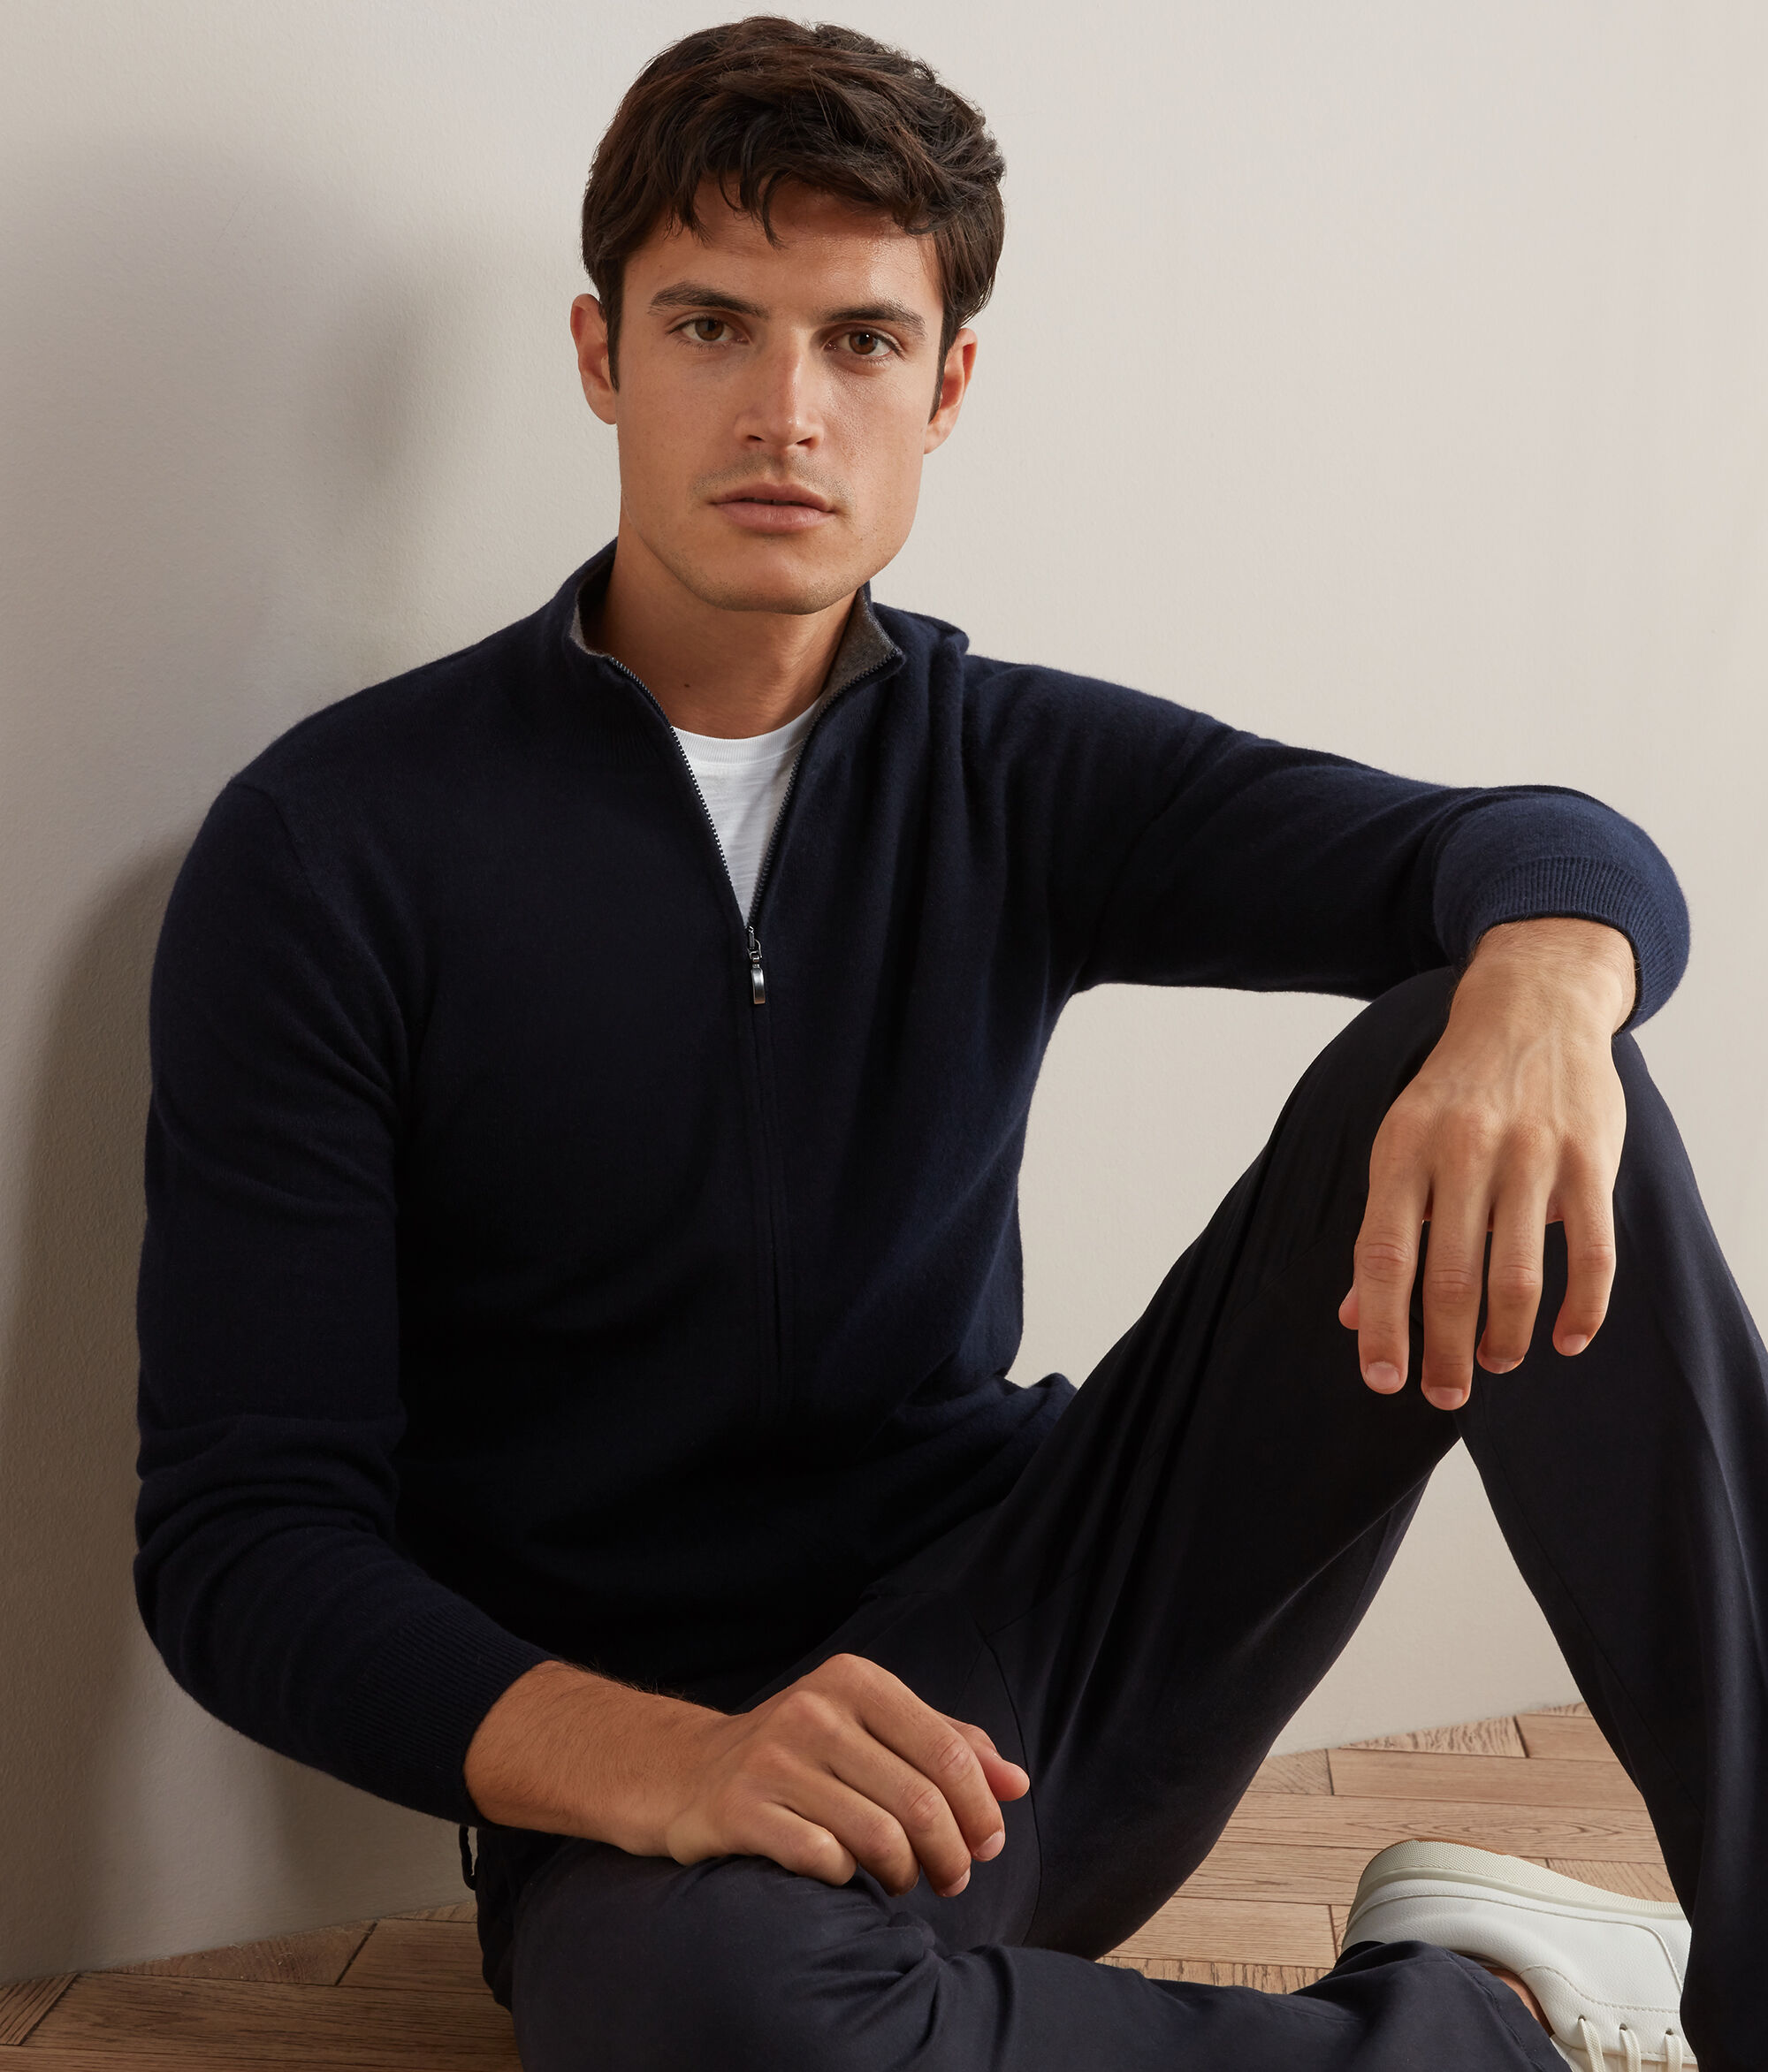 Inside Out Zipped Through Cashmere - Men - Ready-to-Wear